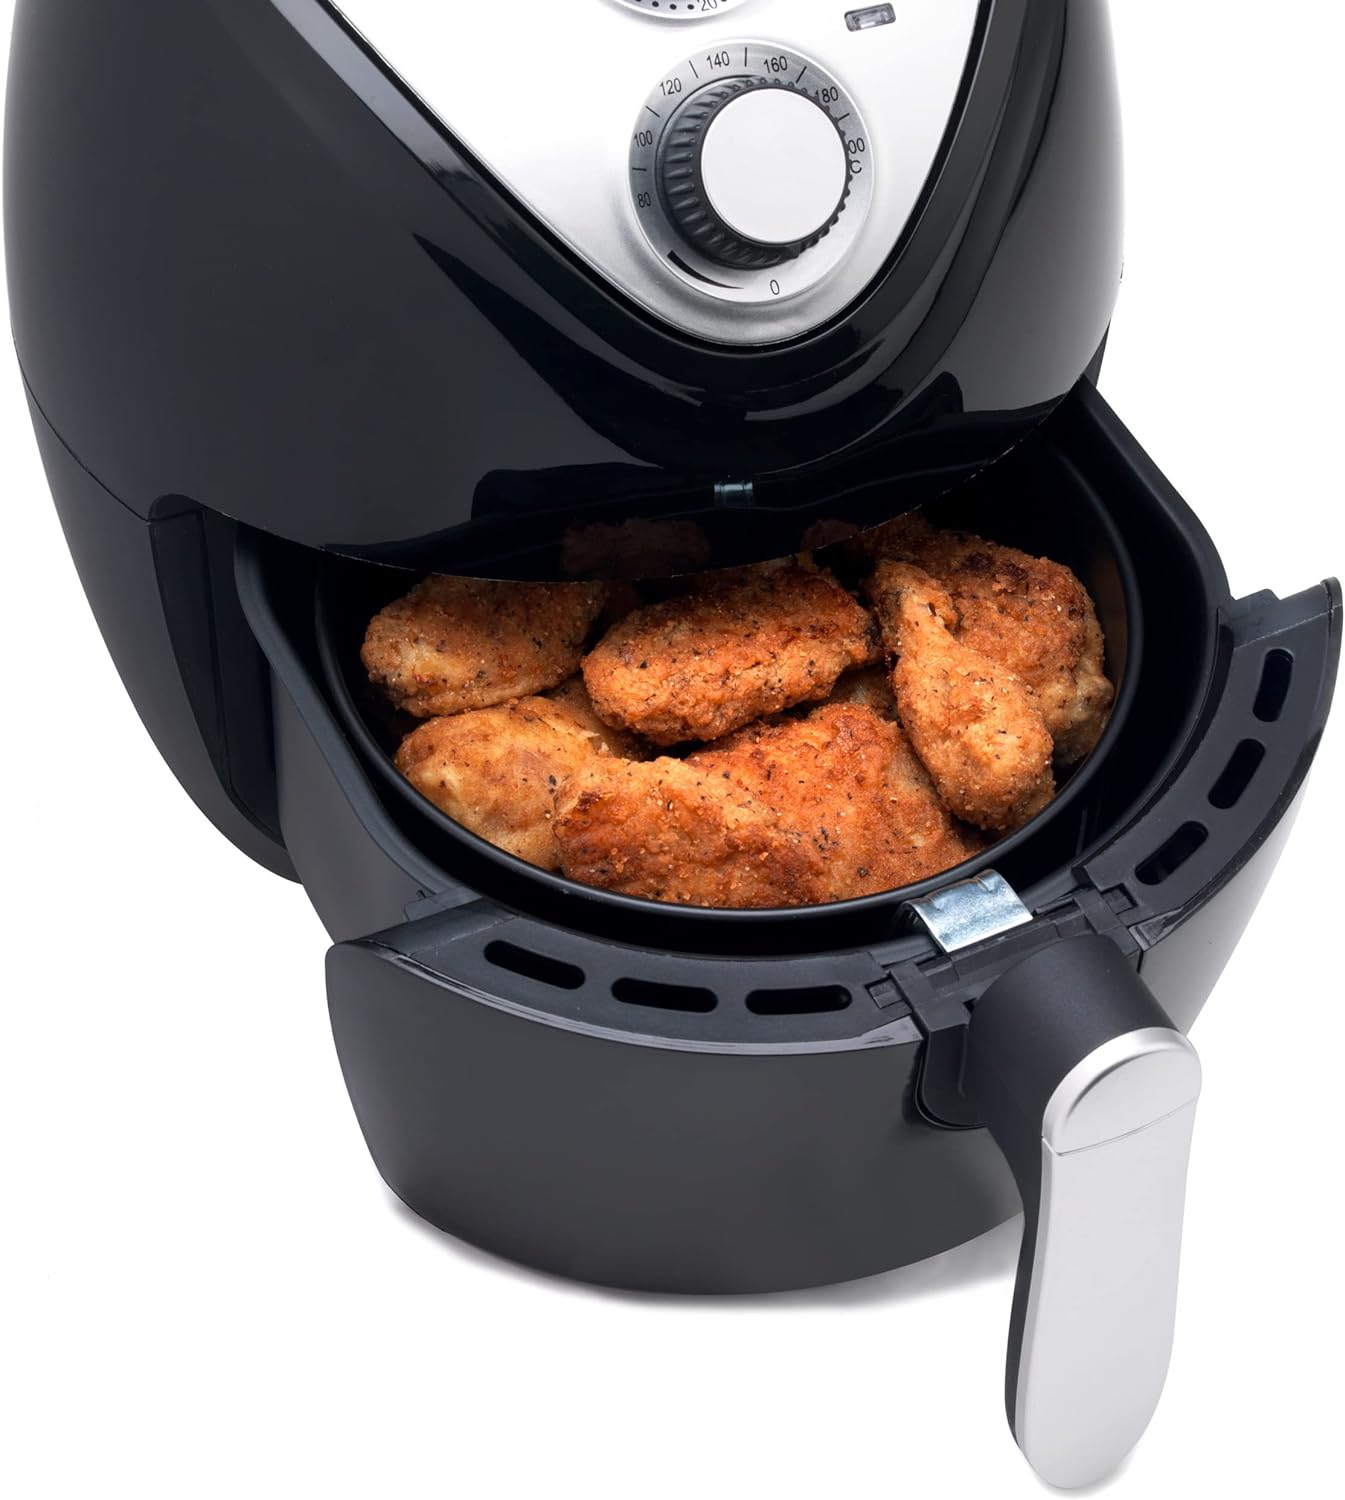 You are currently viewing Salter EK2818 3.2L Air Fryer Review